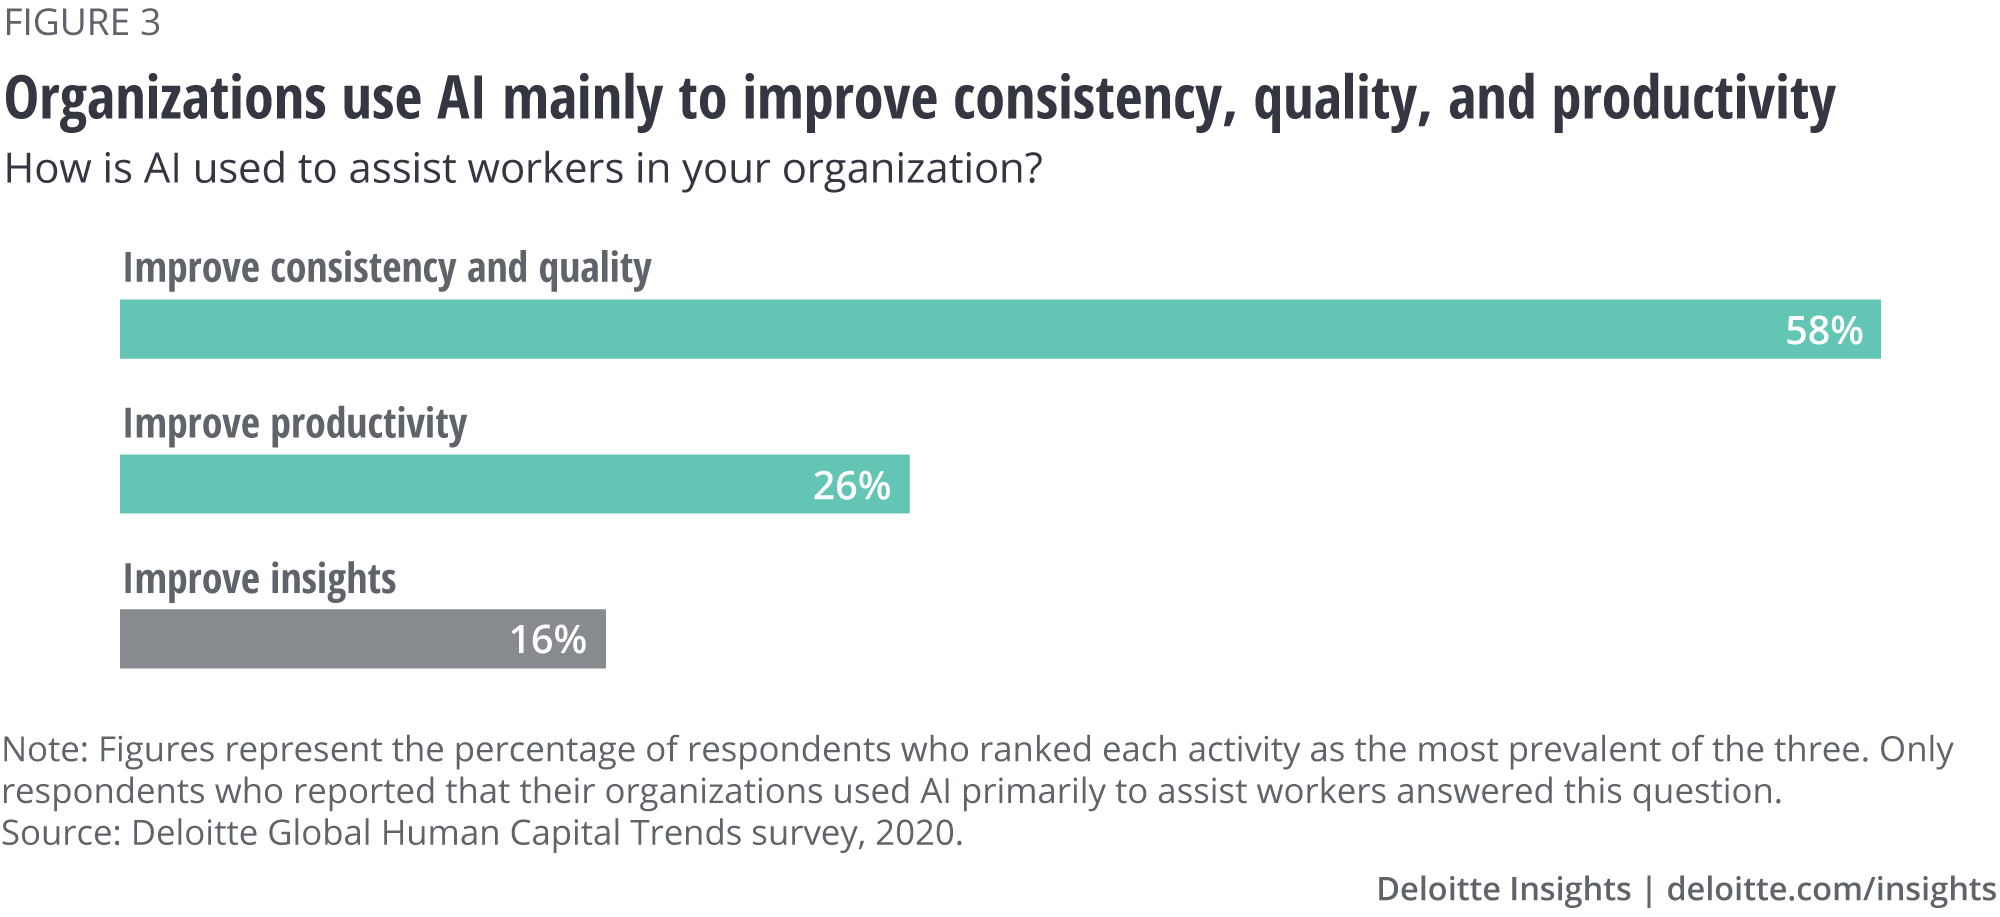 Organizations use AI mainly to improve consistency, quality, and productivity